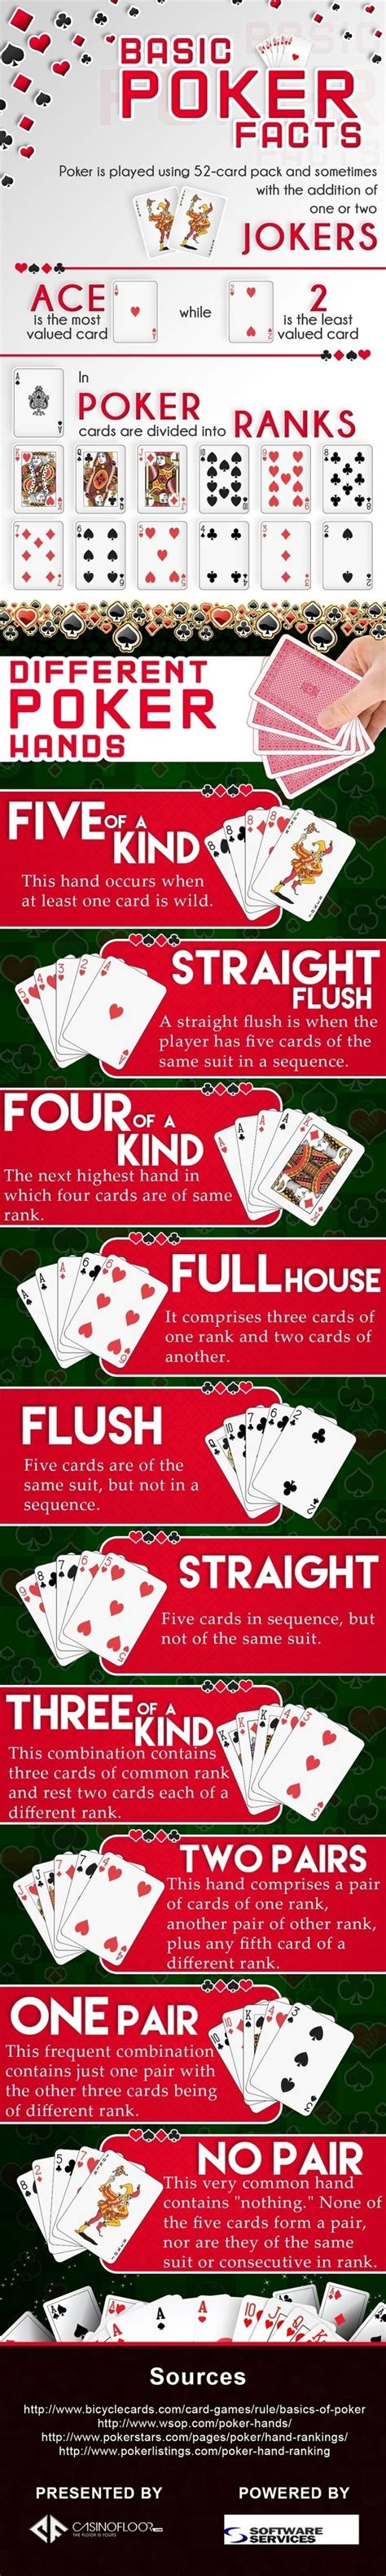 How to play poker basics. What are some of the basic poker strategies that every beginner should know? - Quora